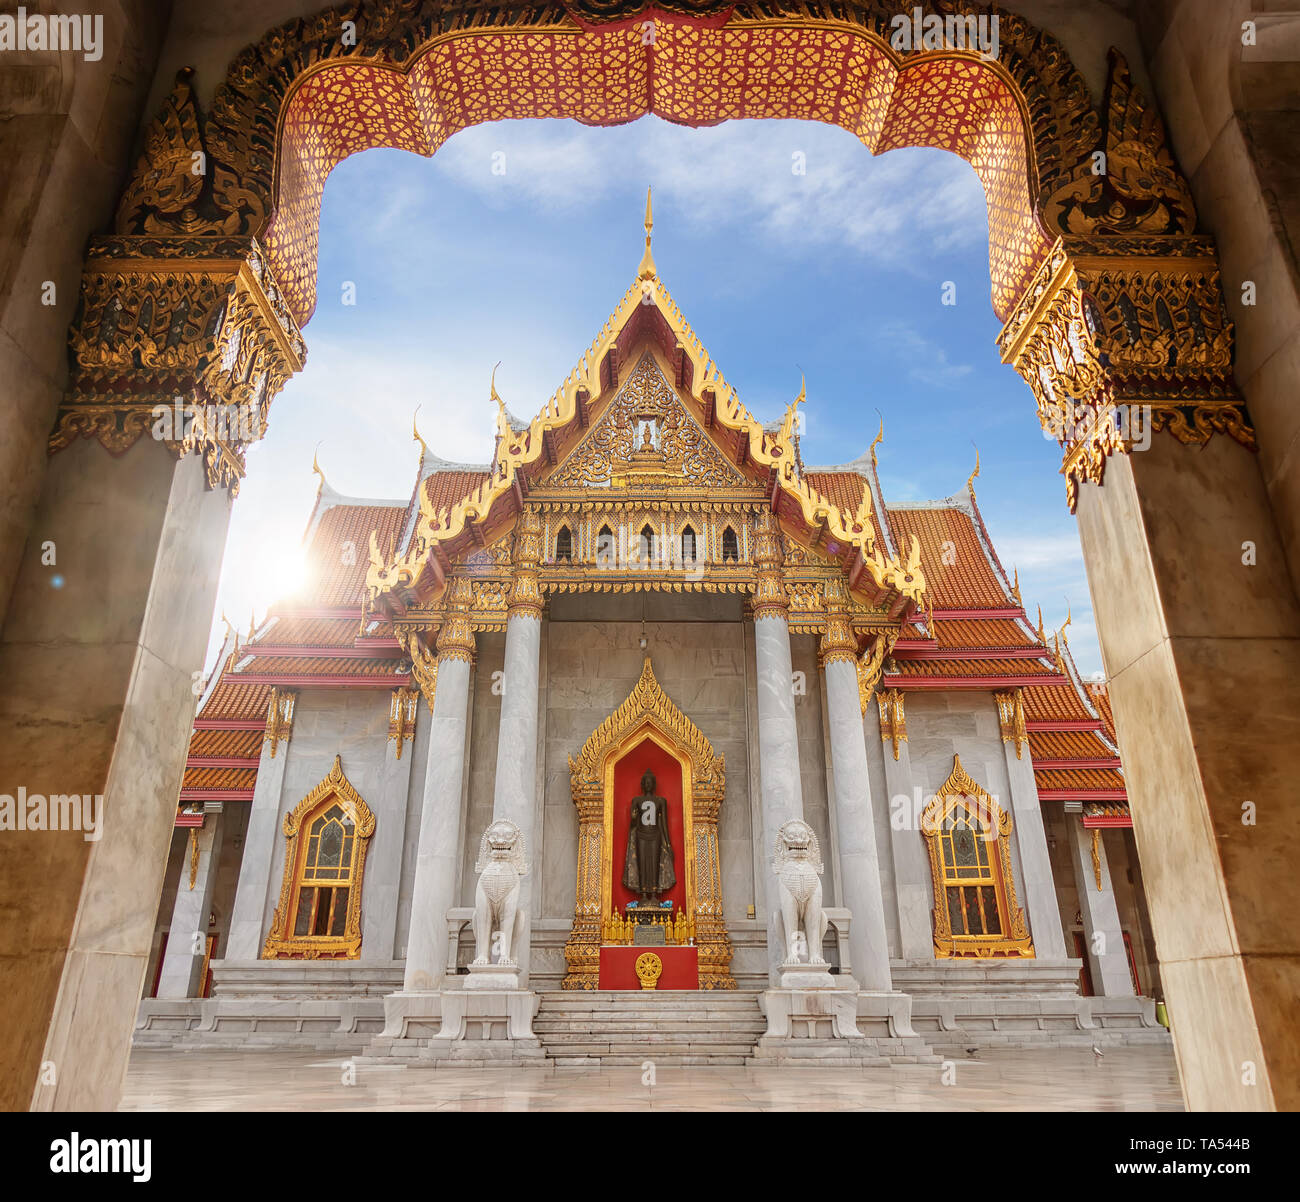 The Marble Temple or Wat Benchamabophit Dusit Wanaram in morning time with sun beam on top of church, famous landmark place for tourist sight seeing i Stock Photo